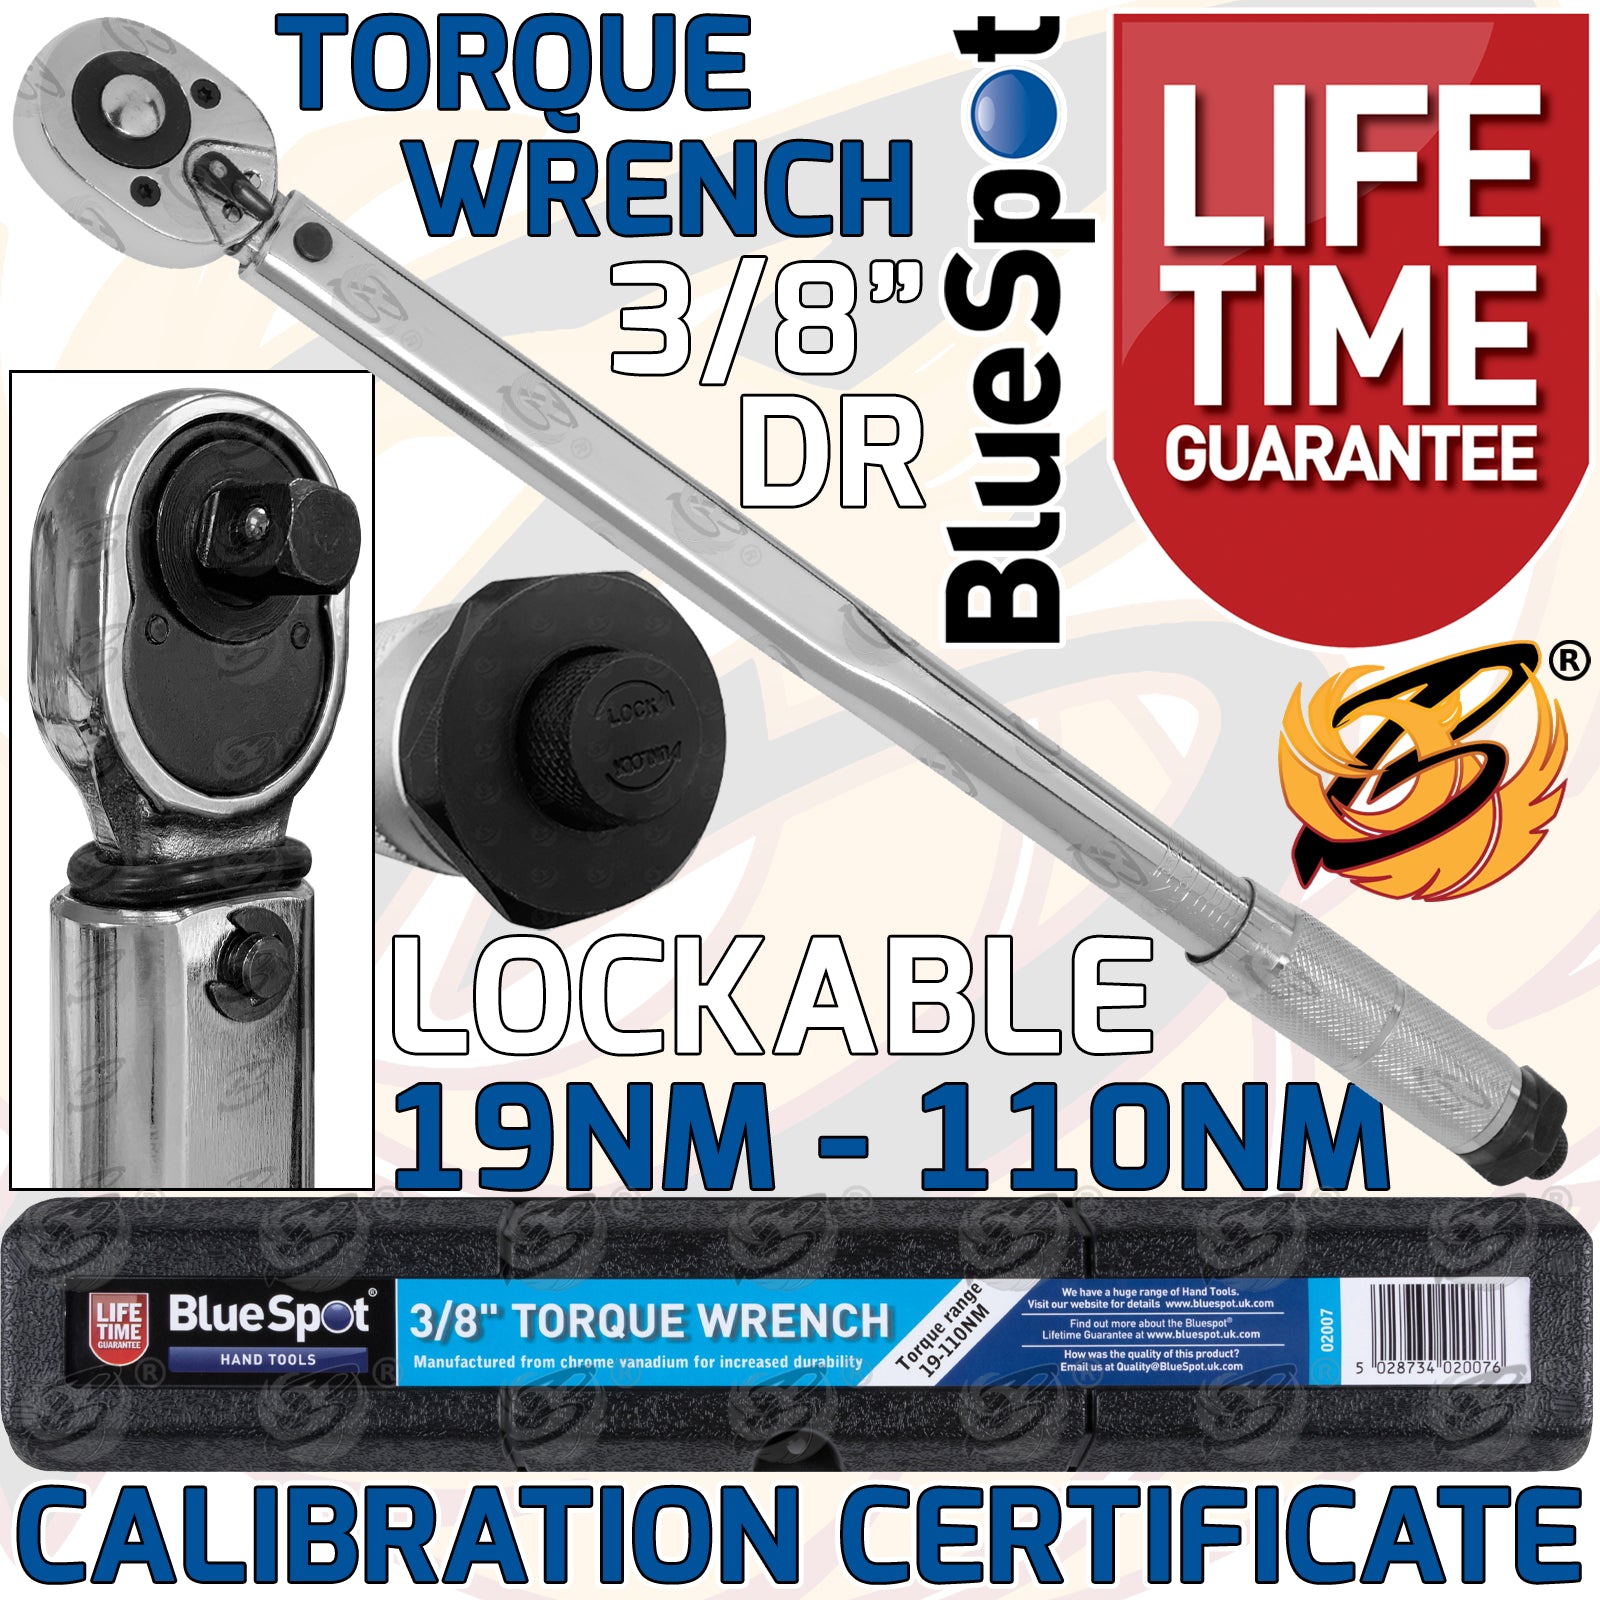 BLUESPOT 3/8" DRIVE CALIBRATED TORQUE WRENCH 19Nm - 110Nm